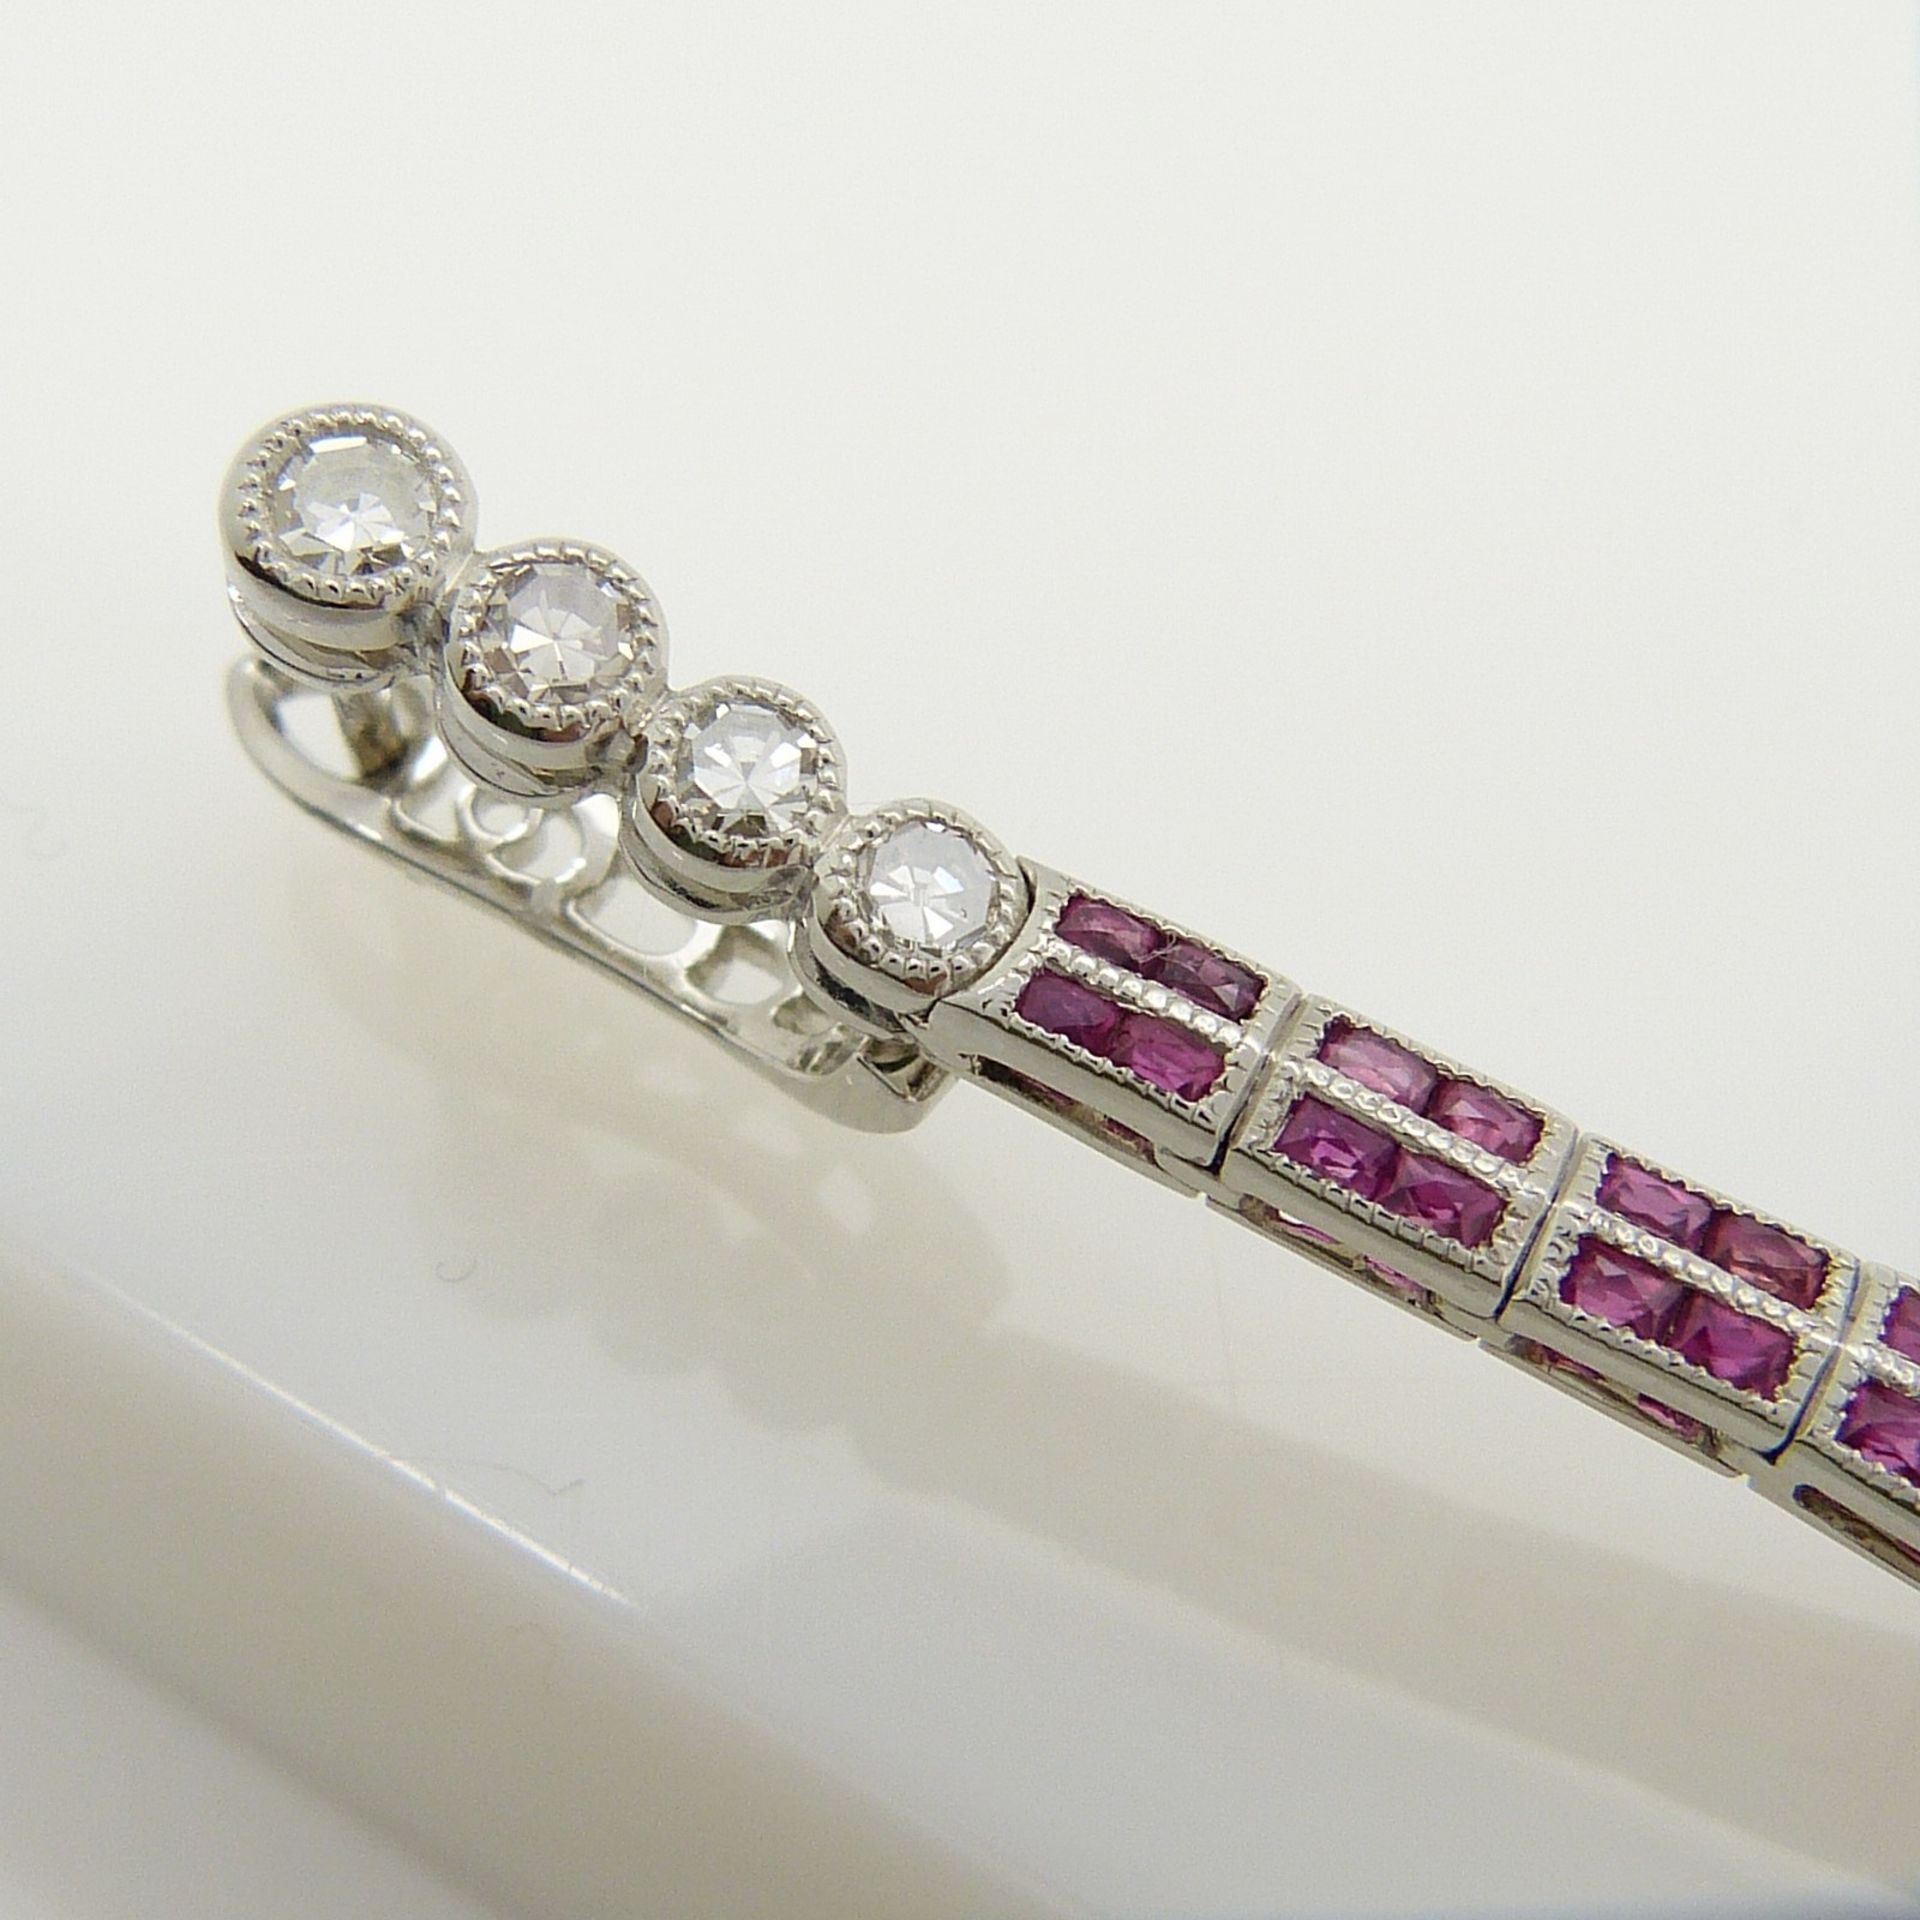 Long platinum Art Deco-style drop earrings set with rubies and diamonds - Image 6 of 9